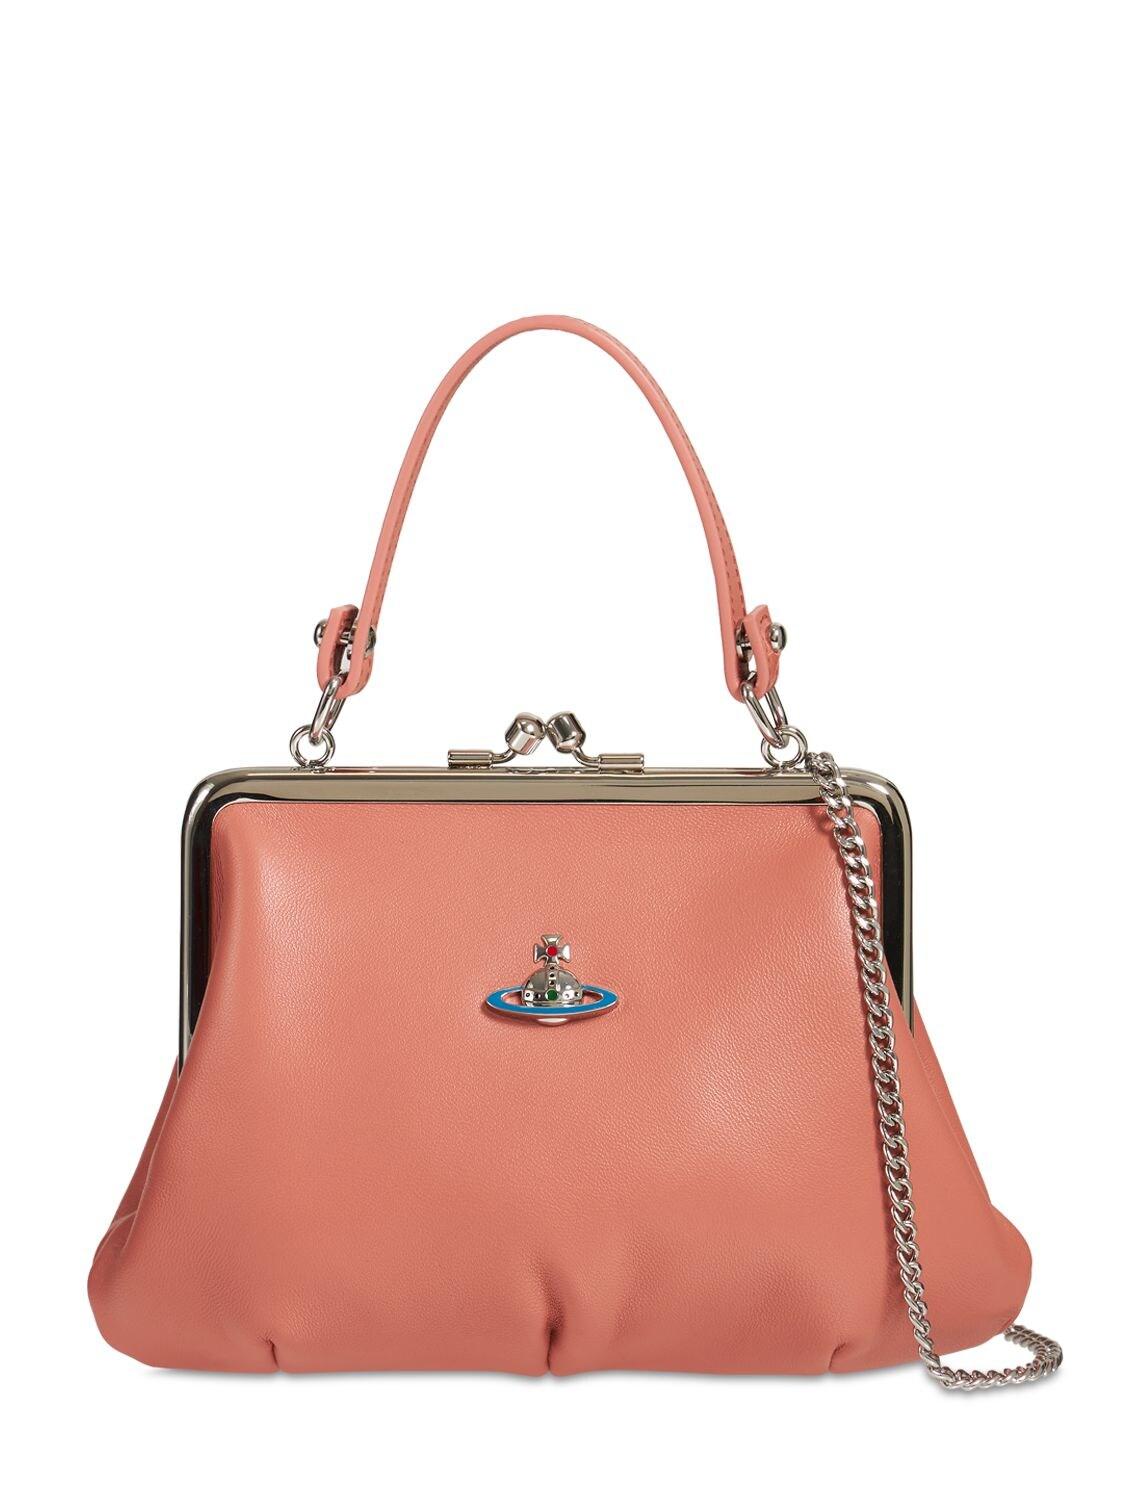 Vivienne Westwood Granny Frame Nappa Leather Bag in Pink | Lyst